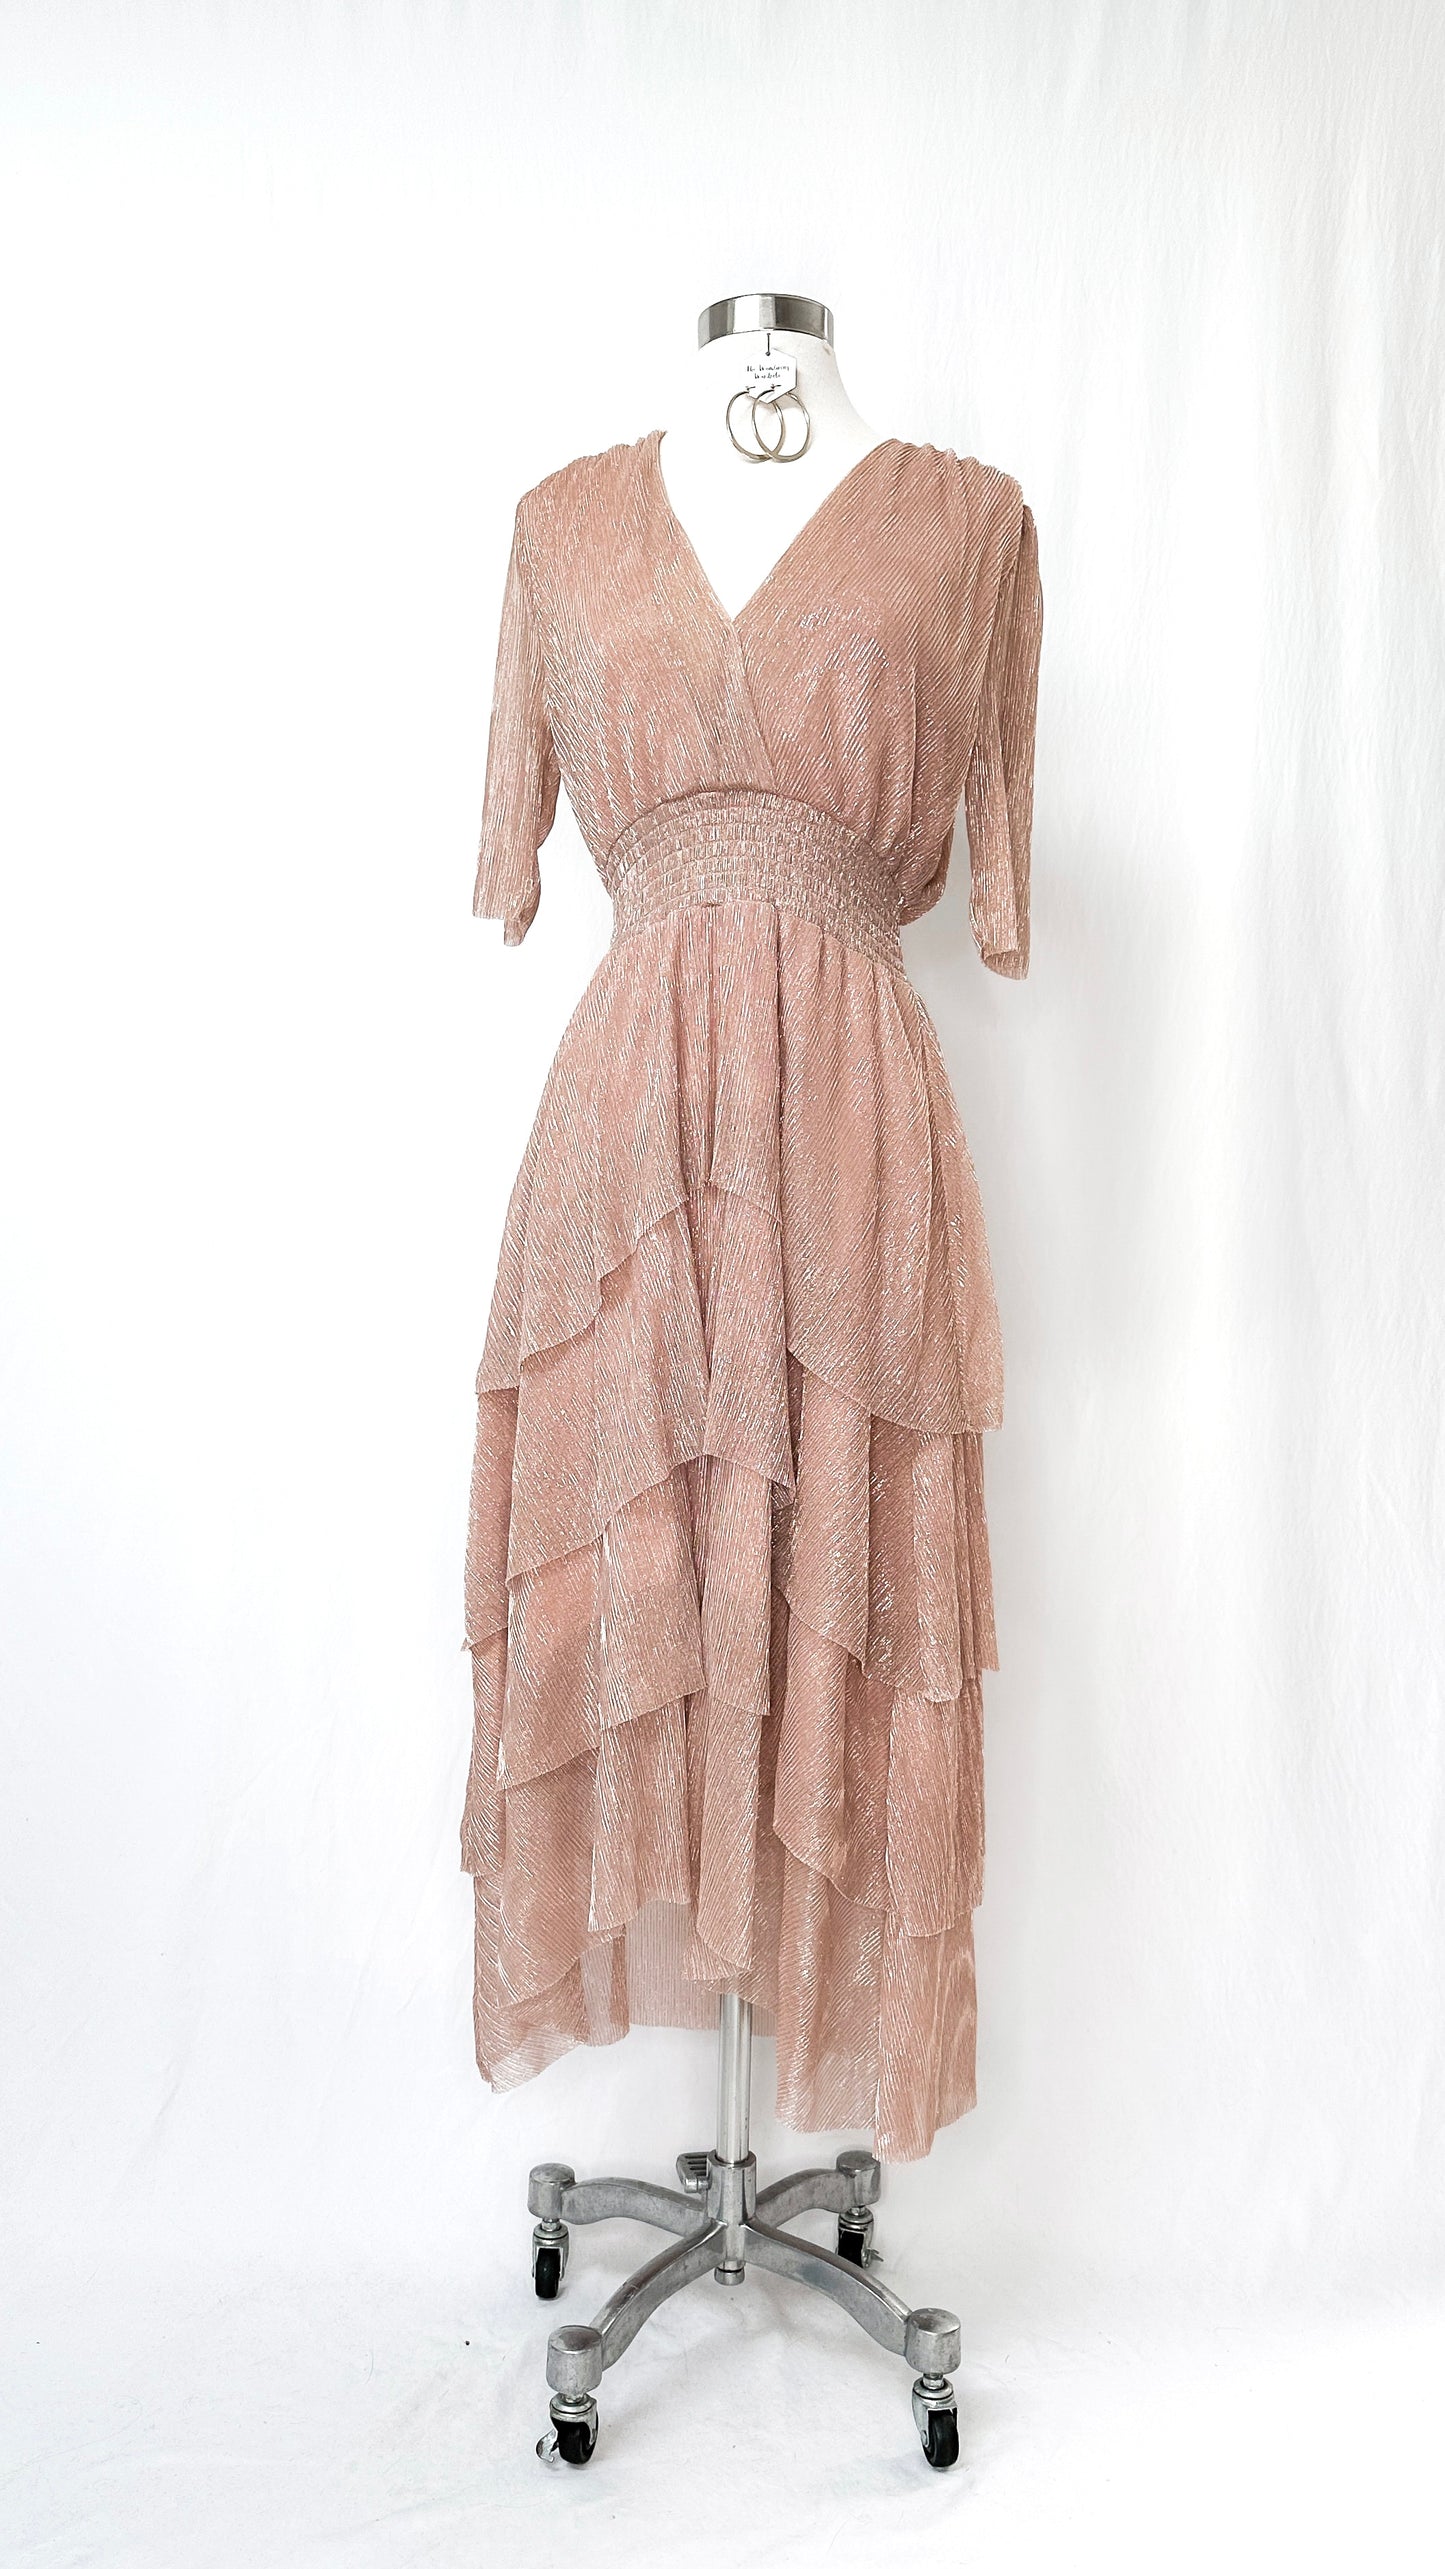 Maje Tiered Lamé Dress in Champagne Pink (3 or M)